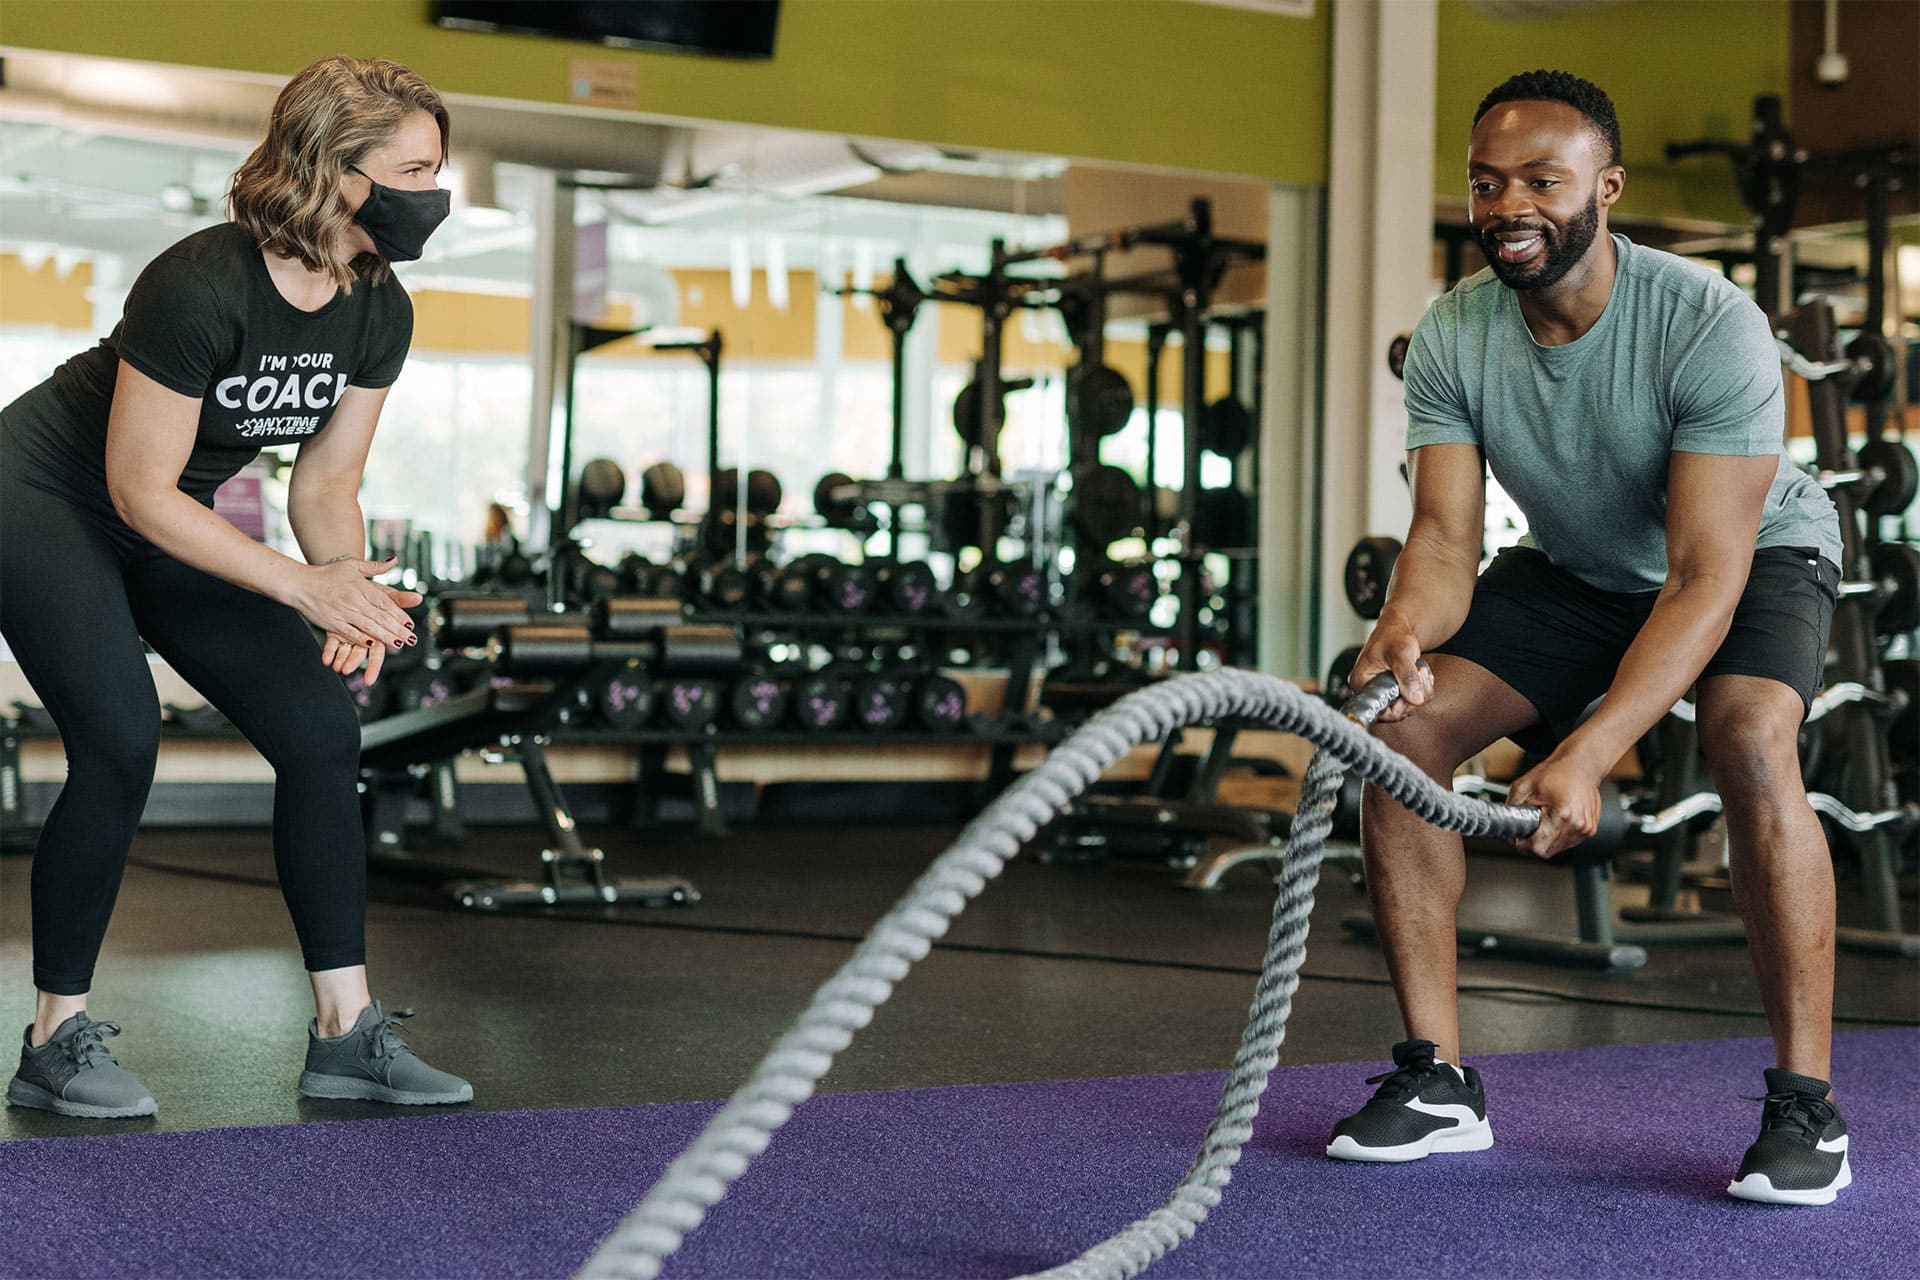 Anytime Fitness - Stoughton (WI 53589), US, shoulder workouts